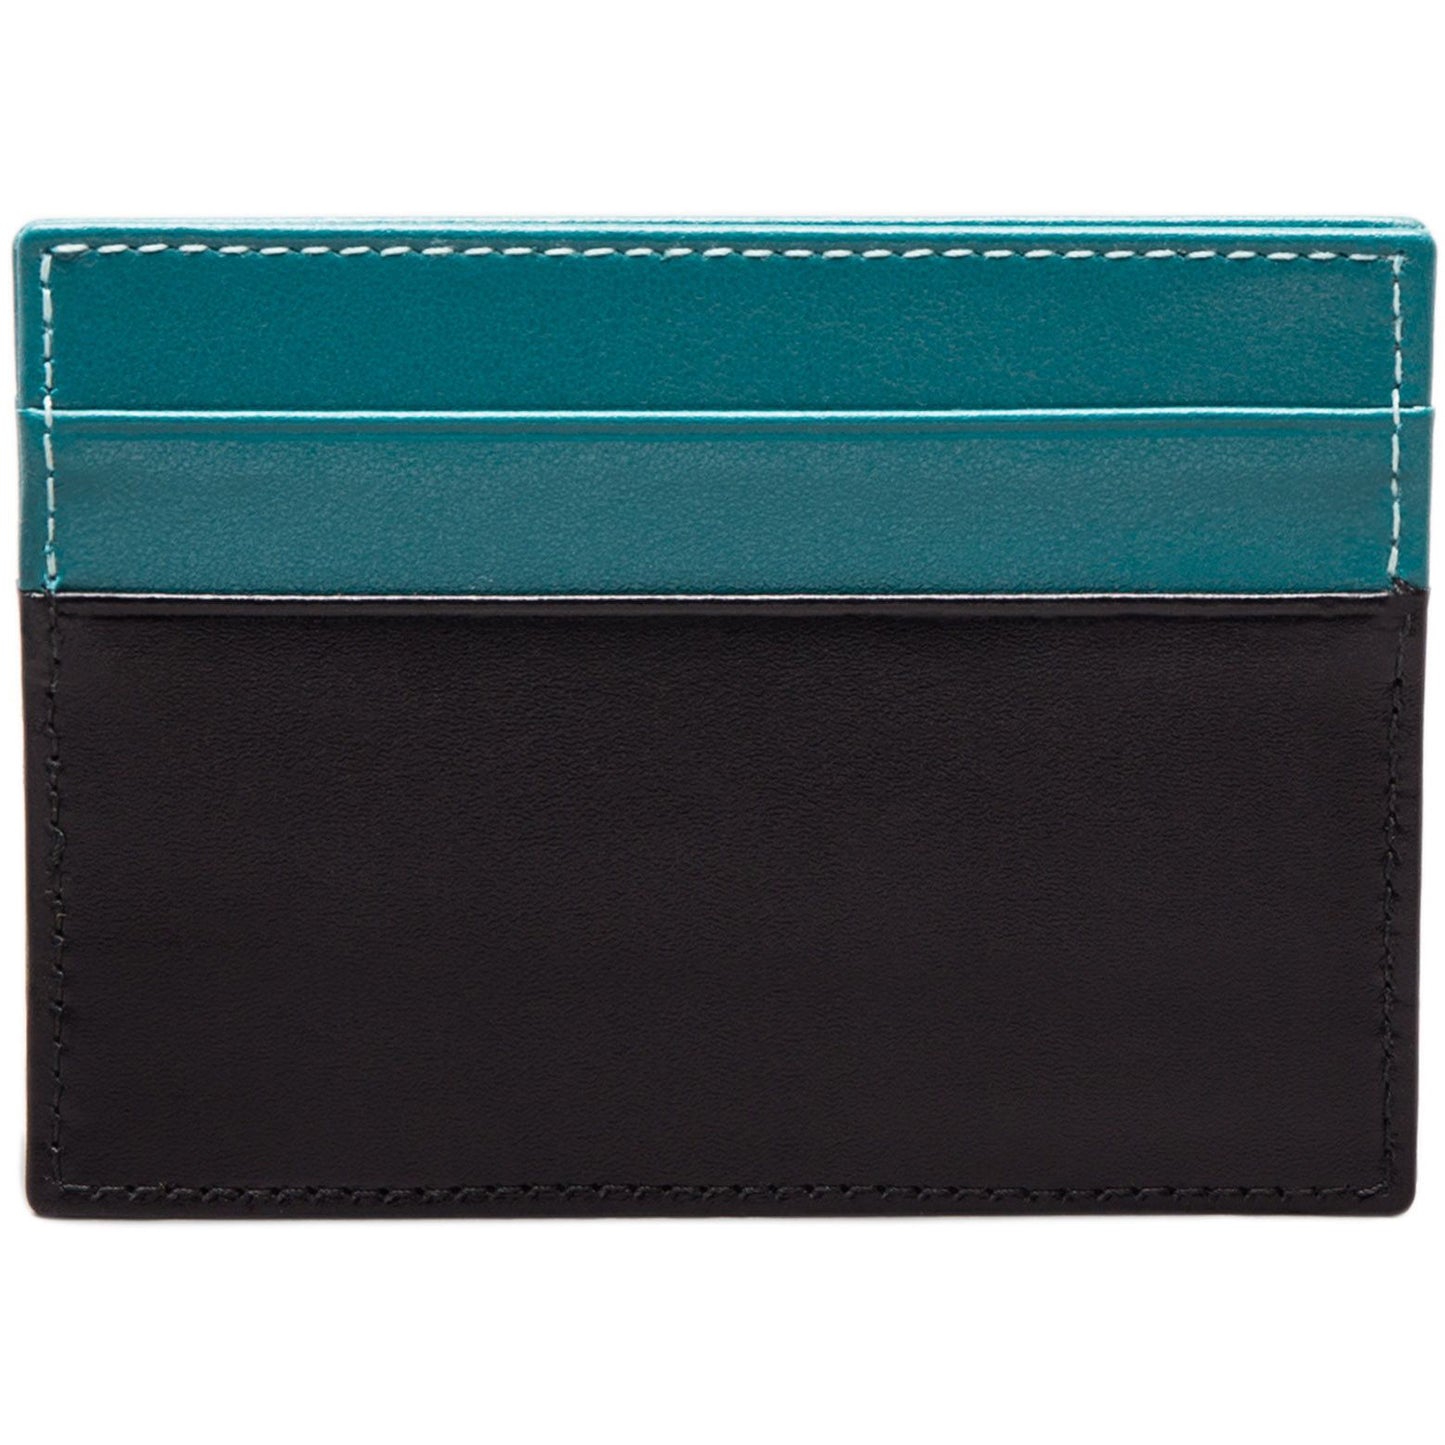 Ettinger Sterling Flat Credit Card Case, Turquoise and Black